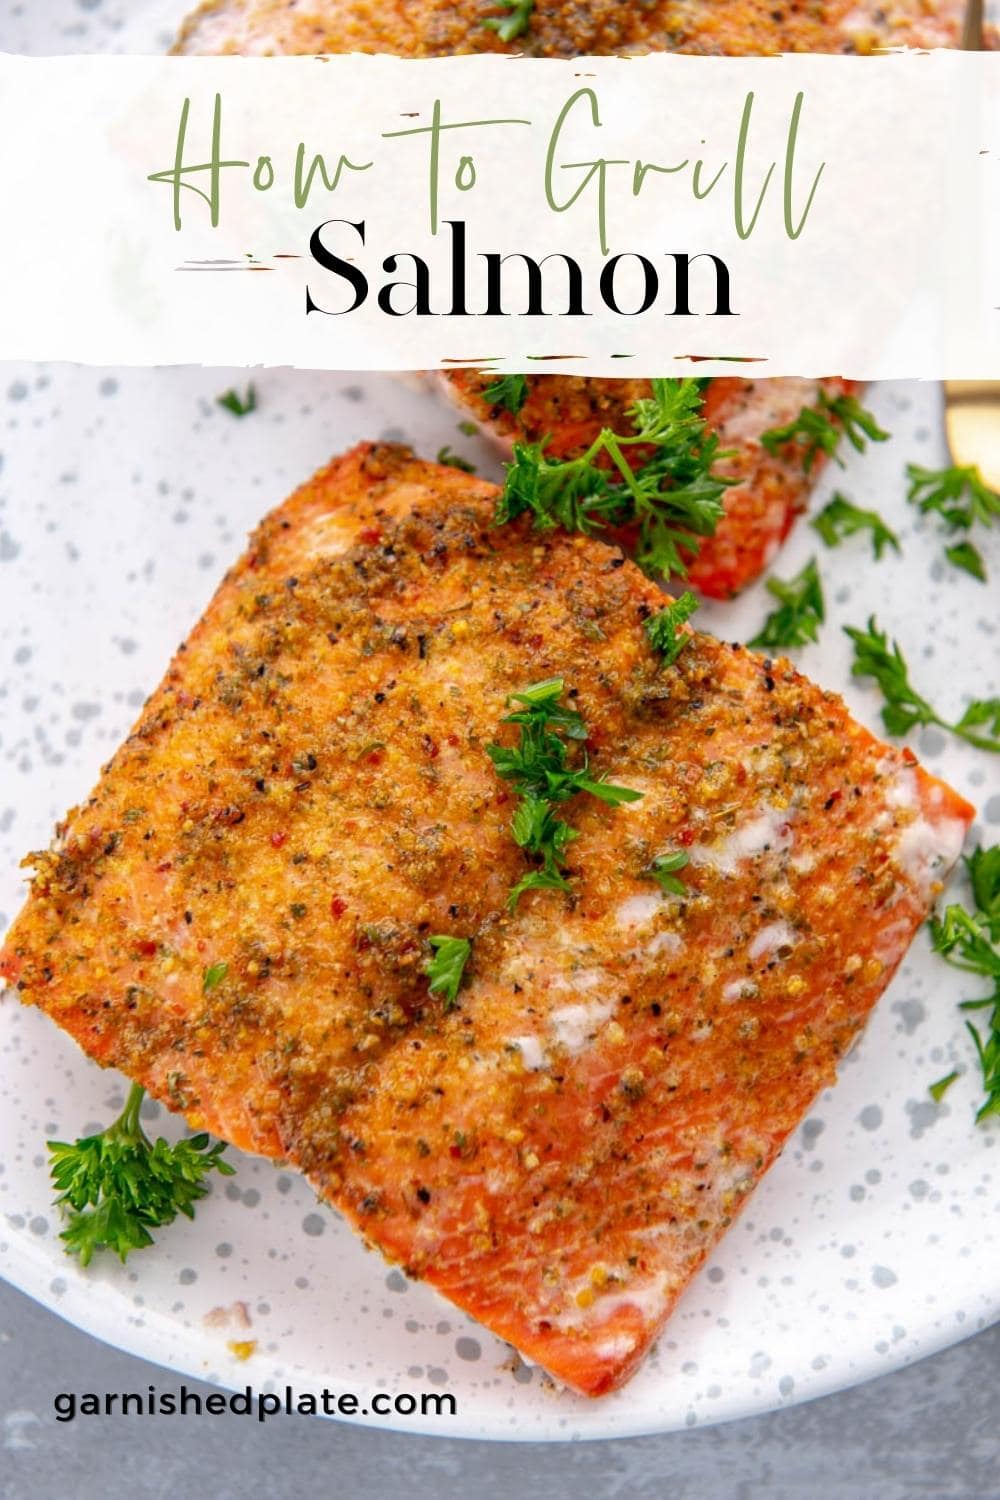 How to Grill Salmon - Garnished Plate